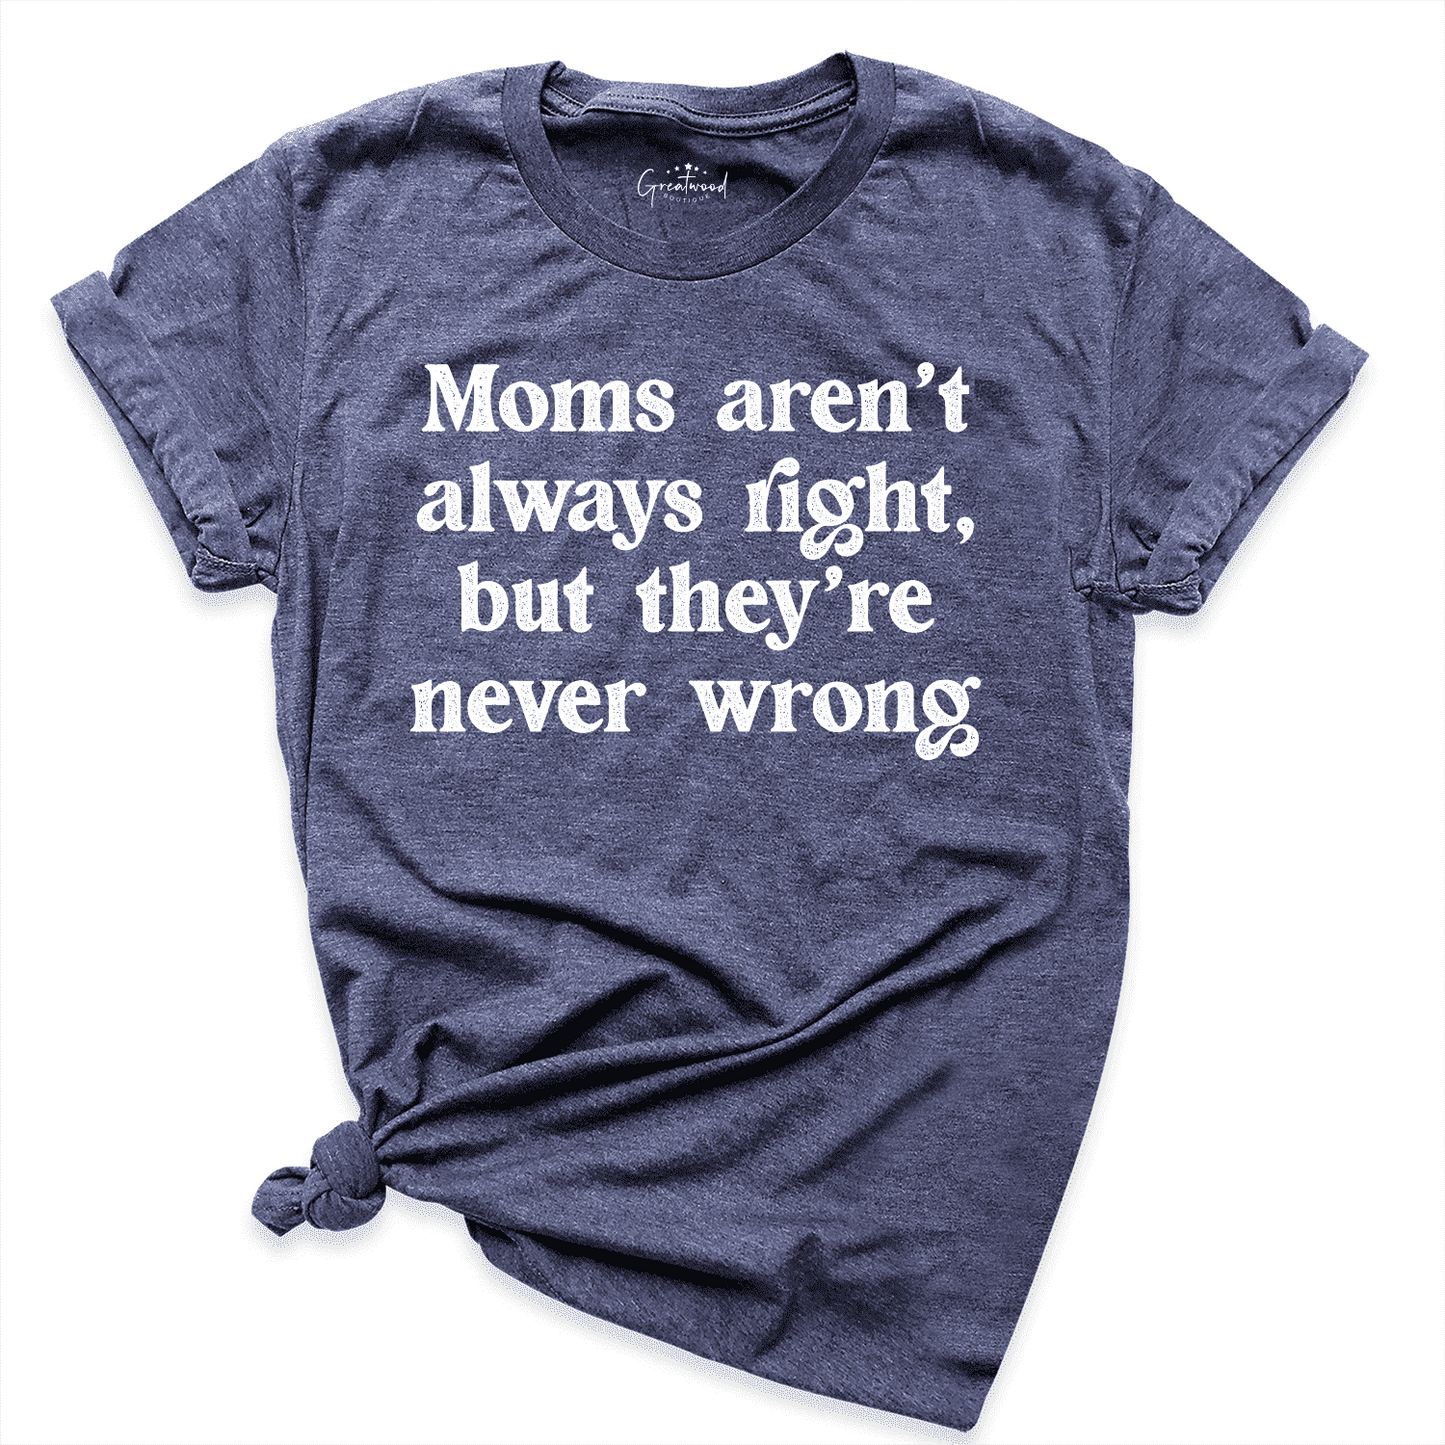 Moms Aren't Always Right But They're Never Wrong Shirt Navy - Greatwood Boutique